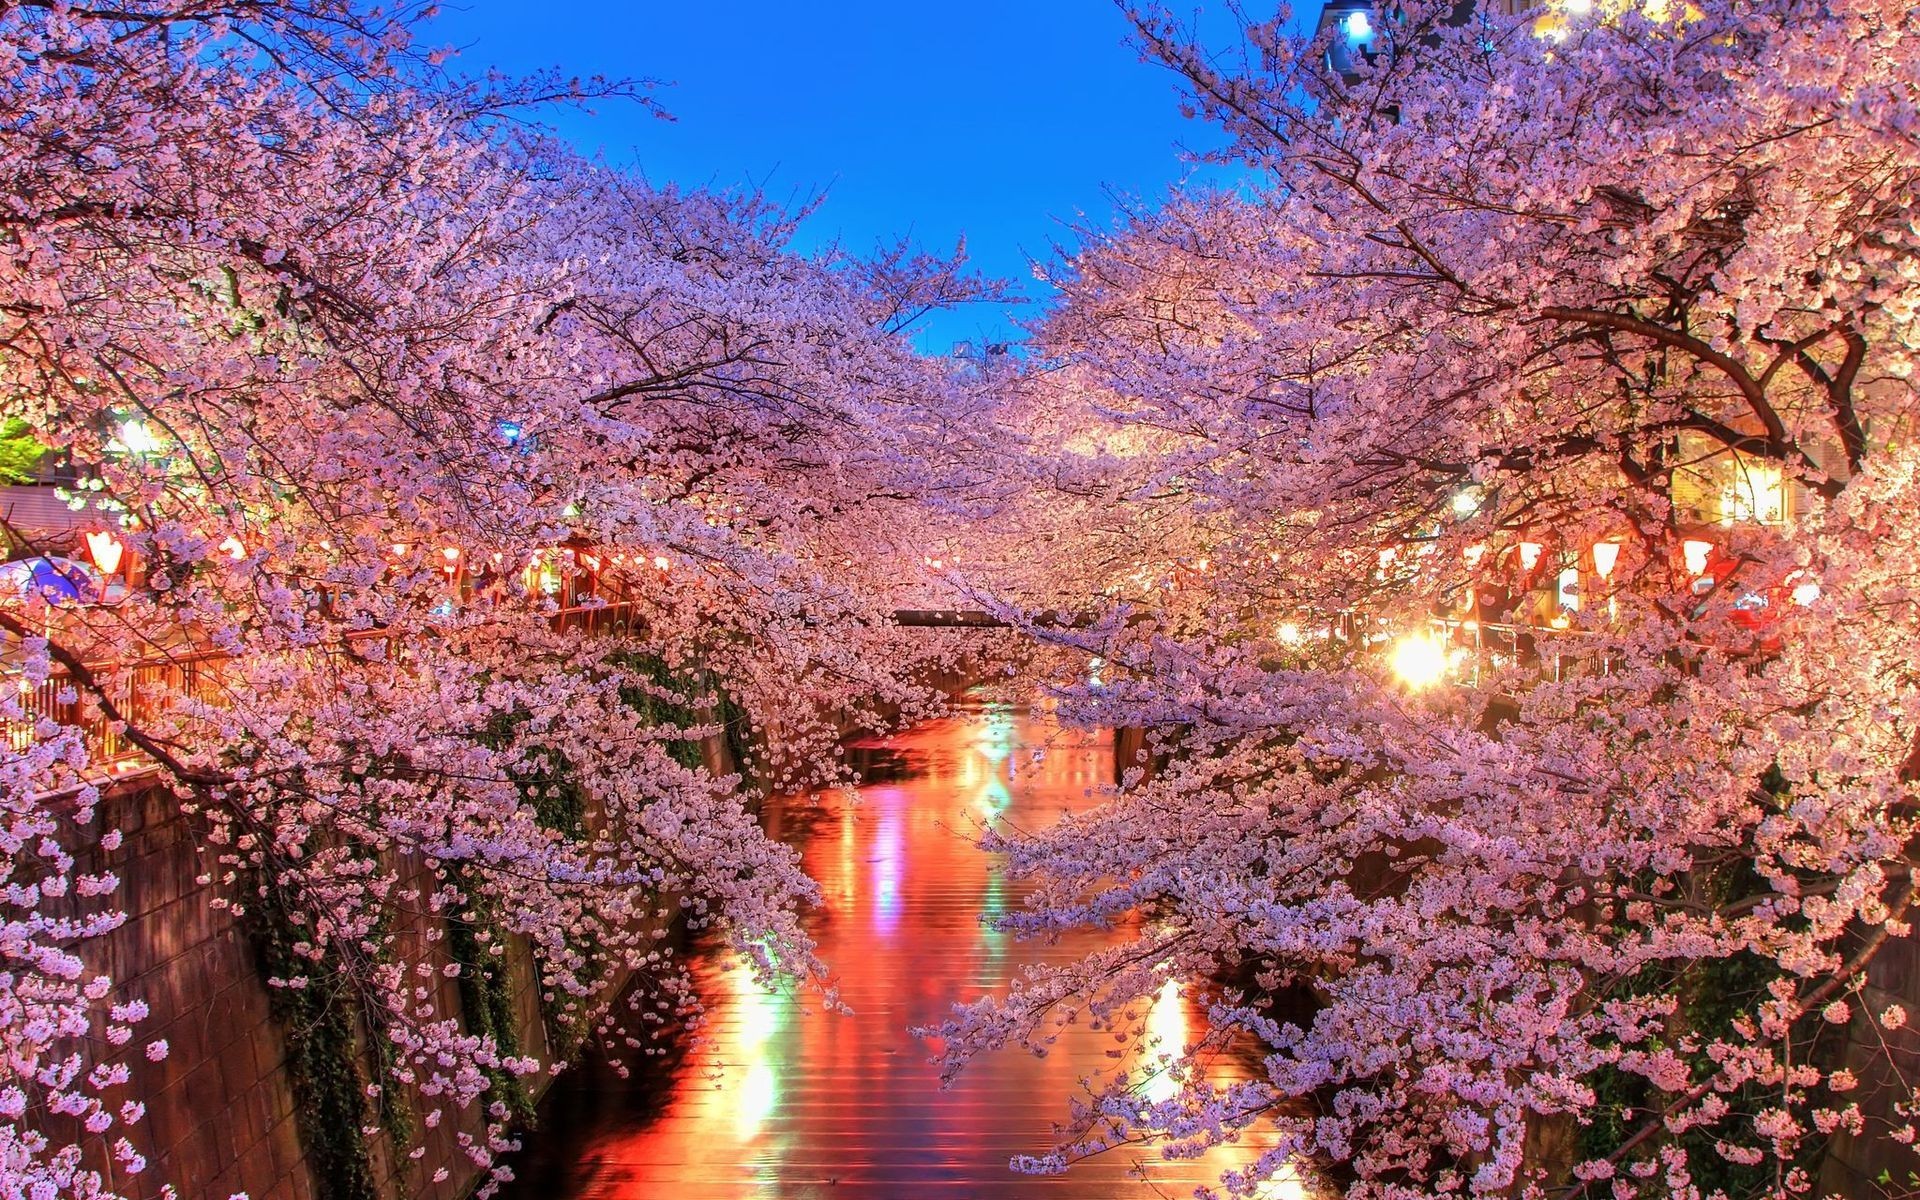 General 1920x1200 cherry blossom photography plants trees flowers lights water Japan Asia city lights canal spring